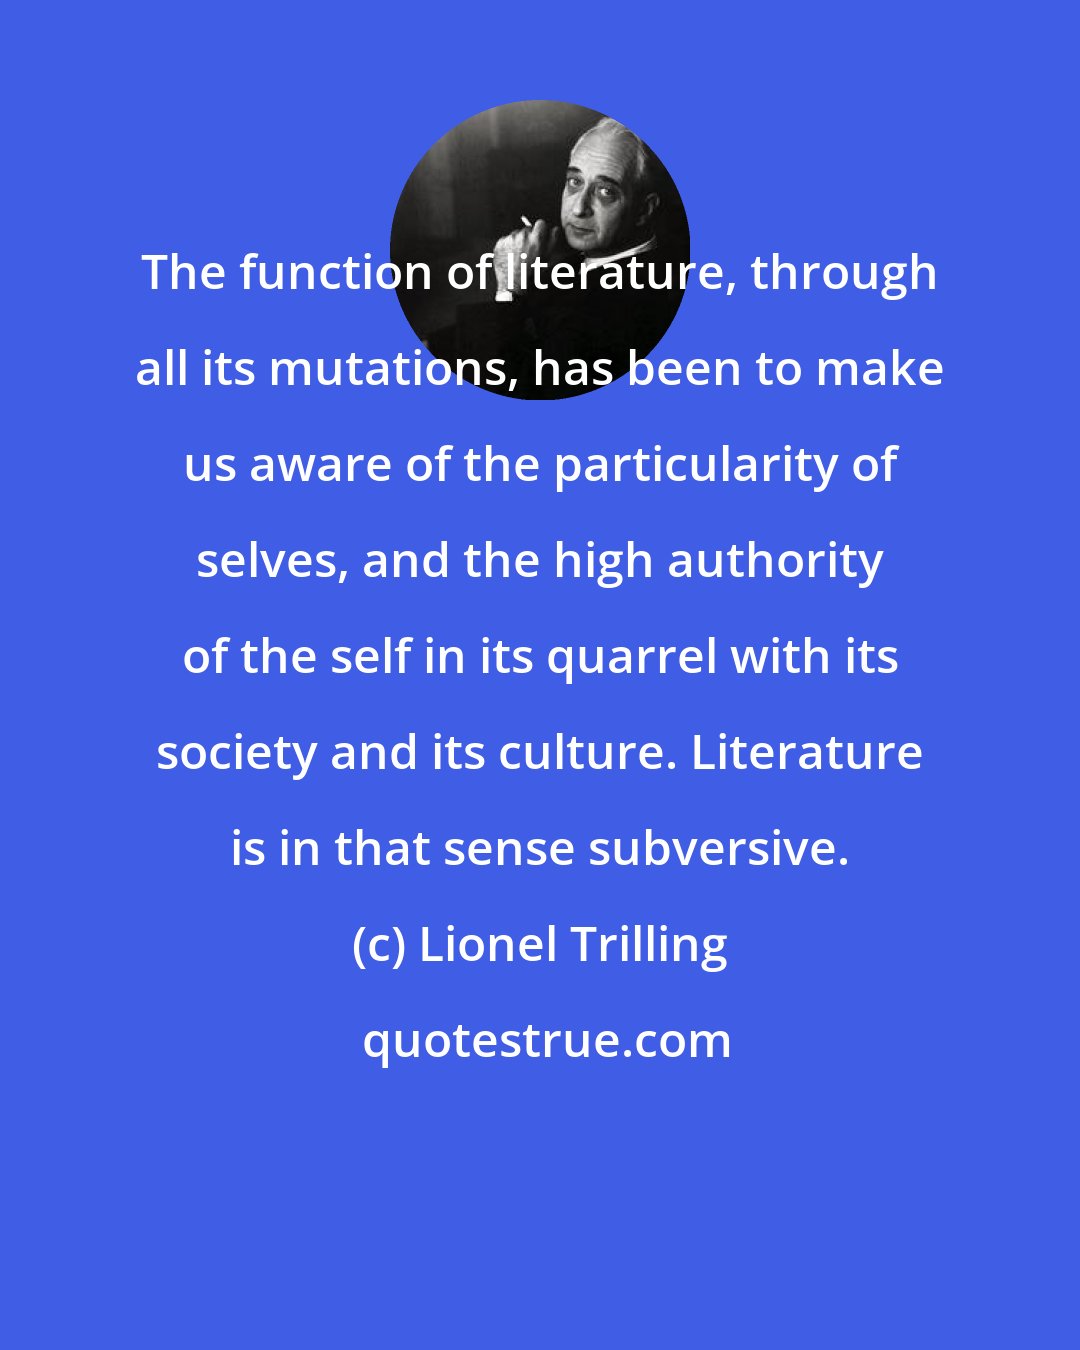 Lionel Trilling: The function of literature, through all its mutations, has been to make us aware of the particularity of selves, and the high authority of the self in its quarrel with its society and its culture. Literature is in that sense subversive.